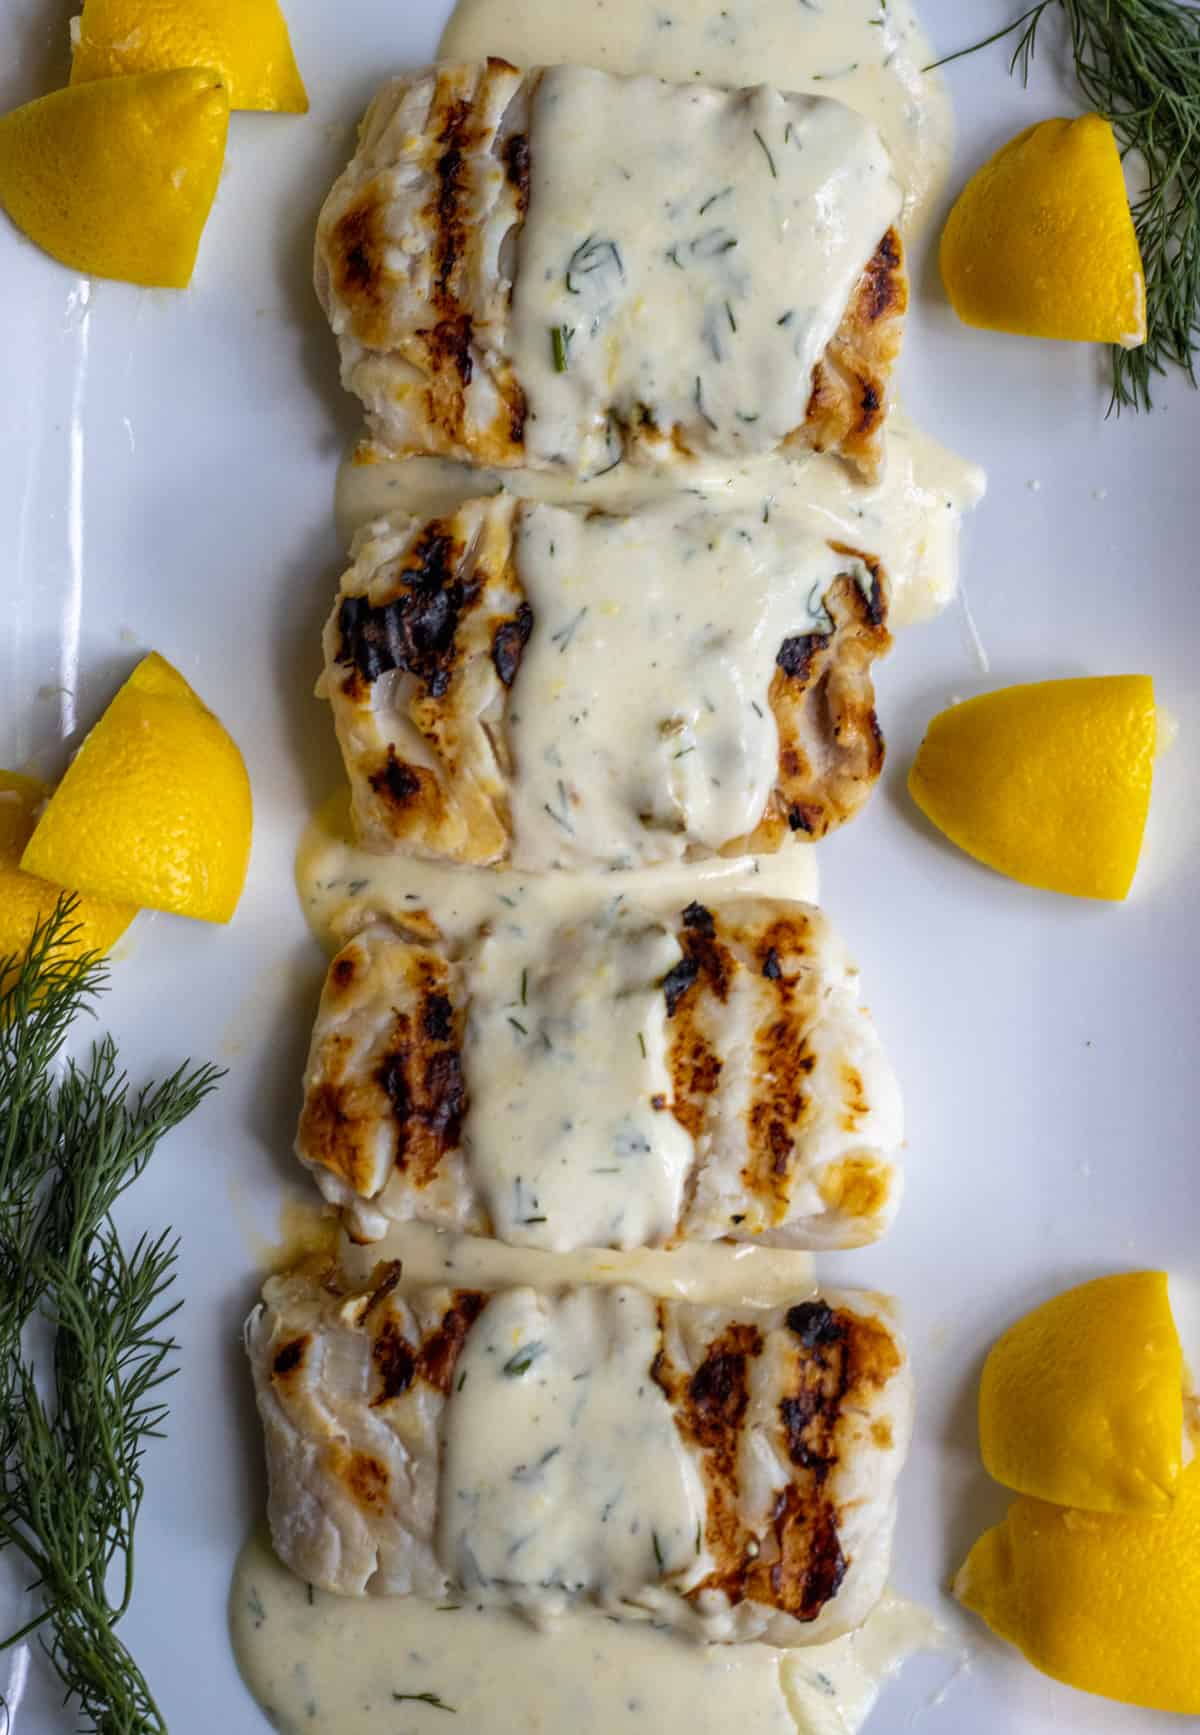 Grilled haddock filets on a platter with creamy lemon dill sauce poured over them.